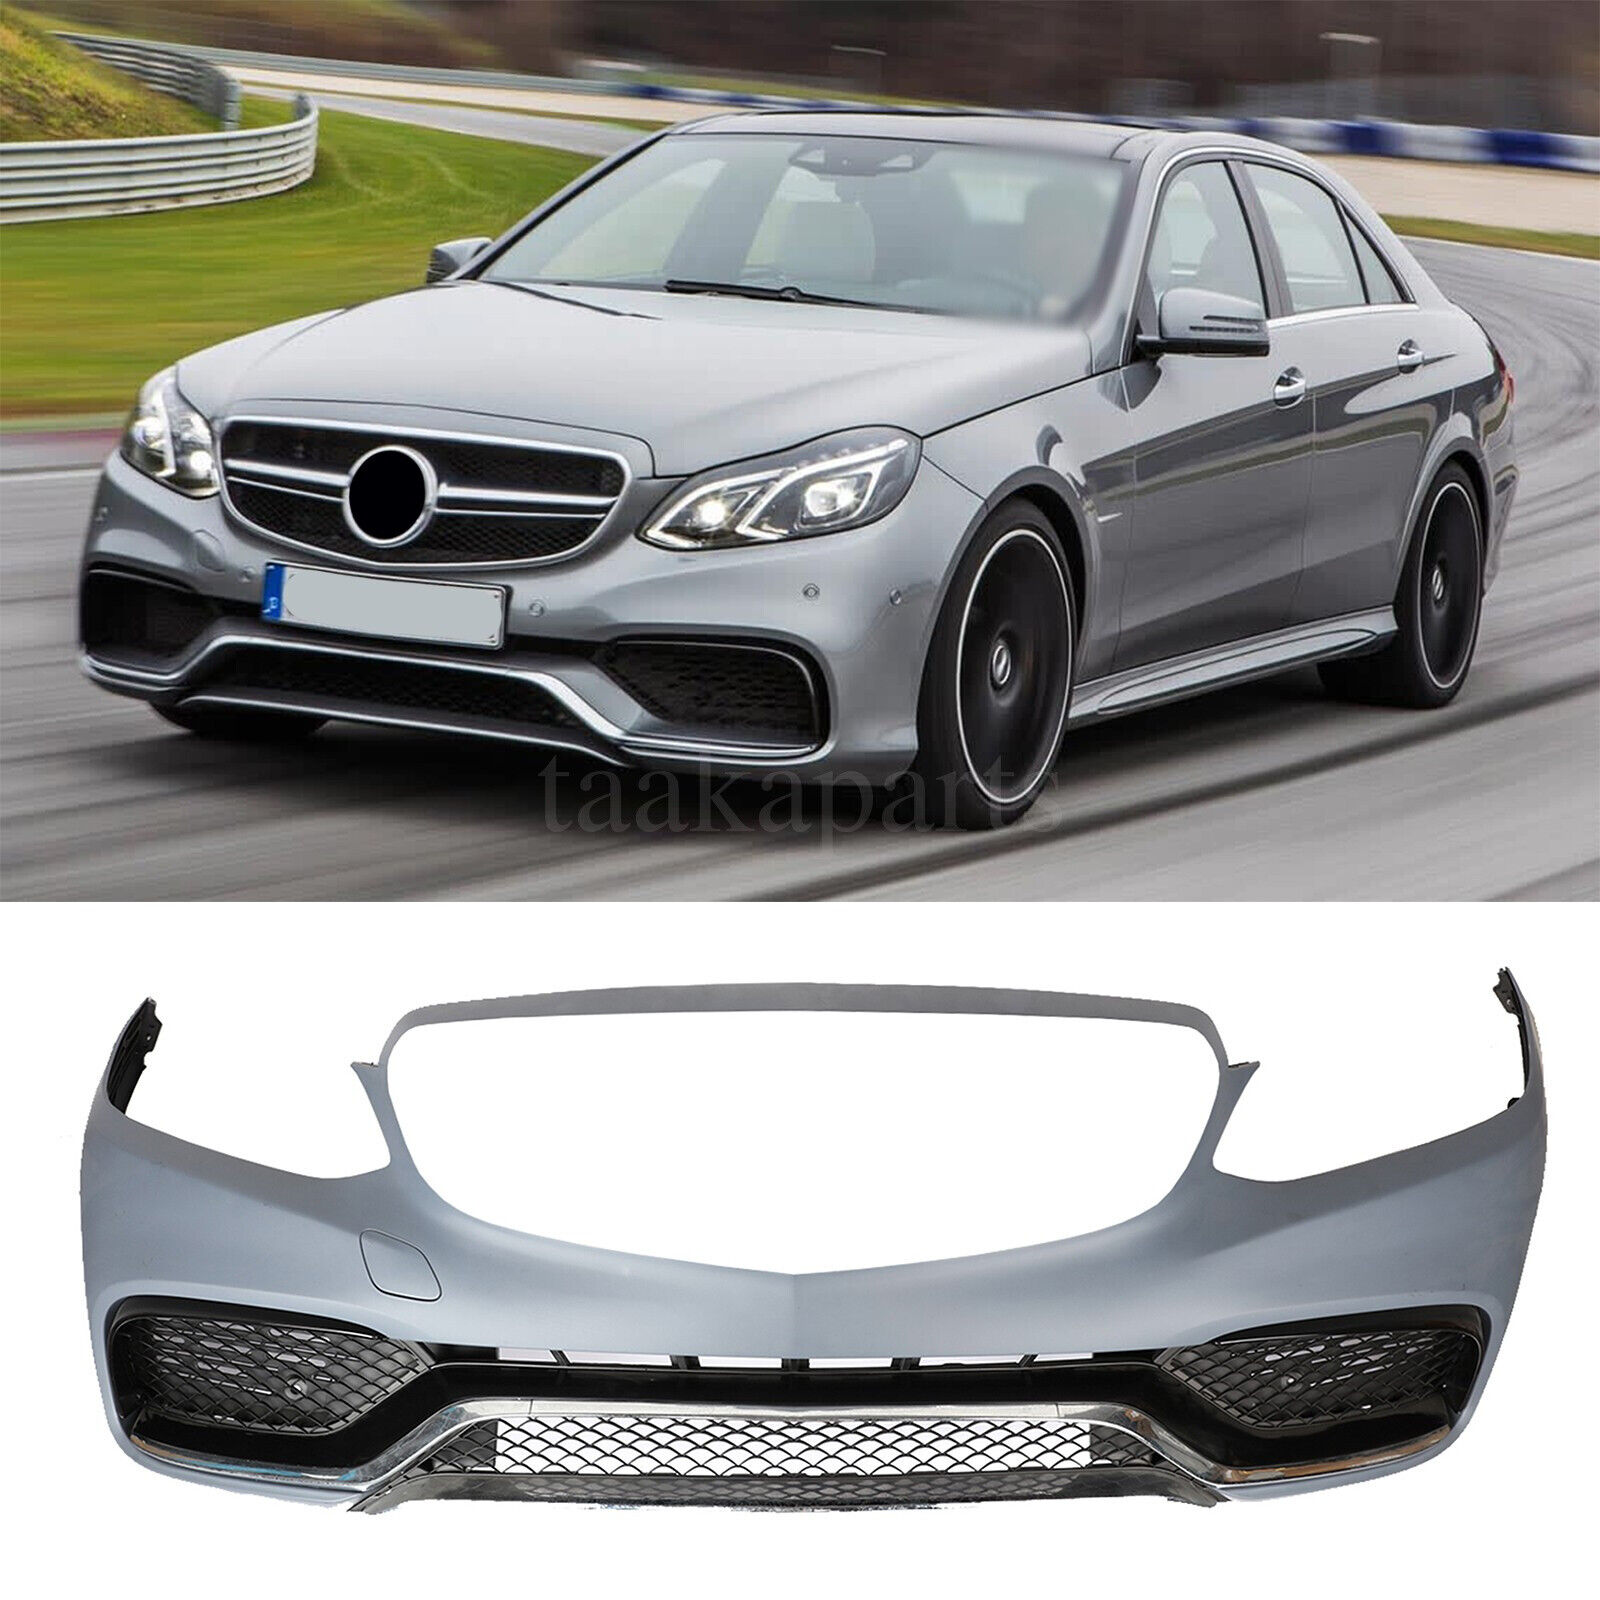 E63 AMG Style Front Bumper body kit W/O PDC for Mercedes Benz 14-16 E-Class W212